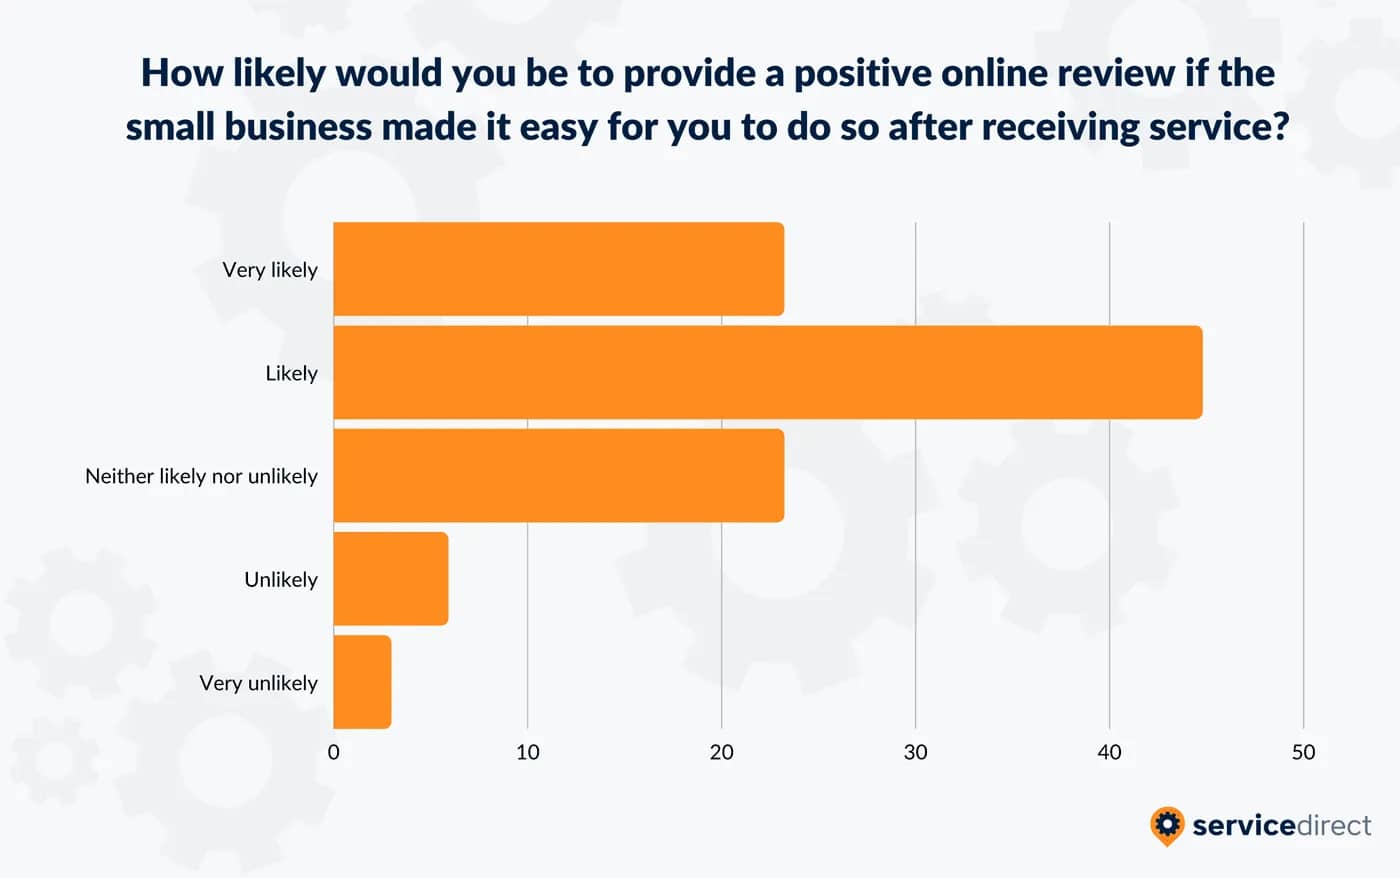 71% of consumers are at least likely to leave a positive online review if a small business makes it easy for them to do so. 